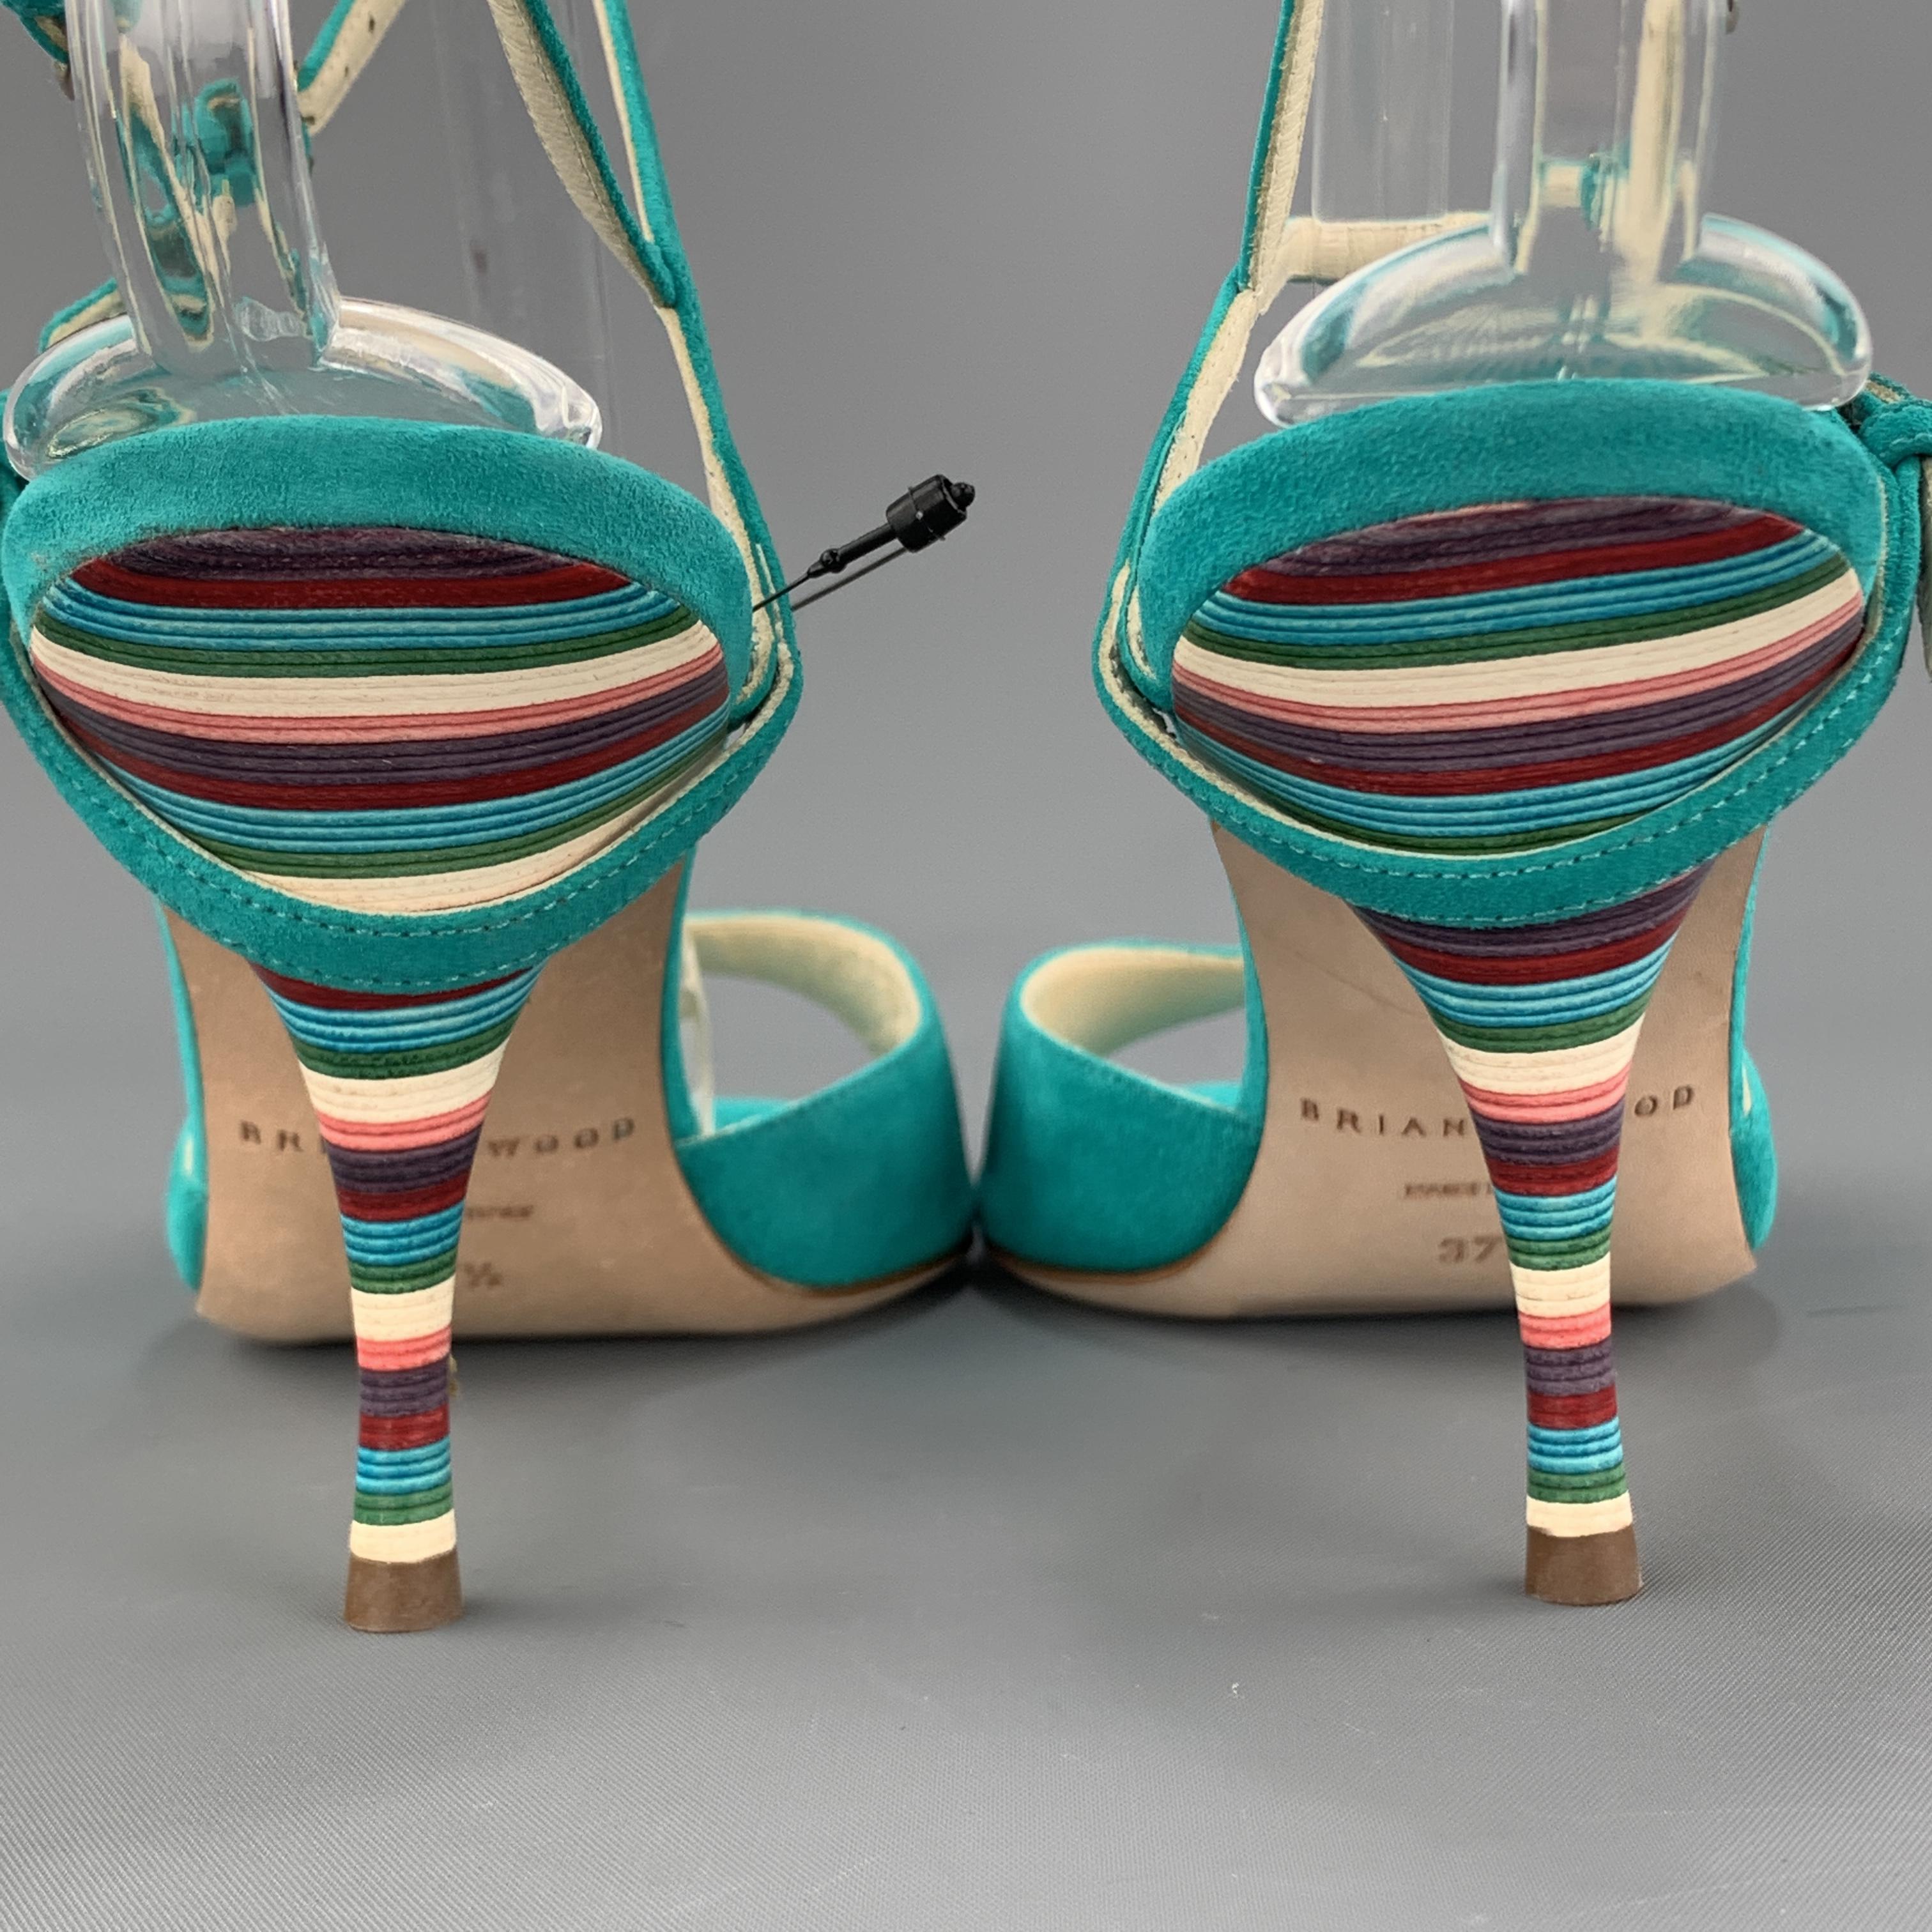 BRIAN ATWOOD 7.5 Turquoise Suede Rainbow Heel Peep Toe TRIXIE Sandals 2